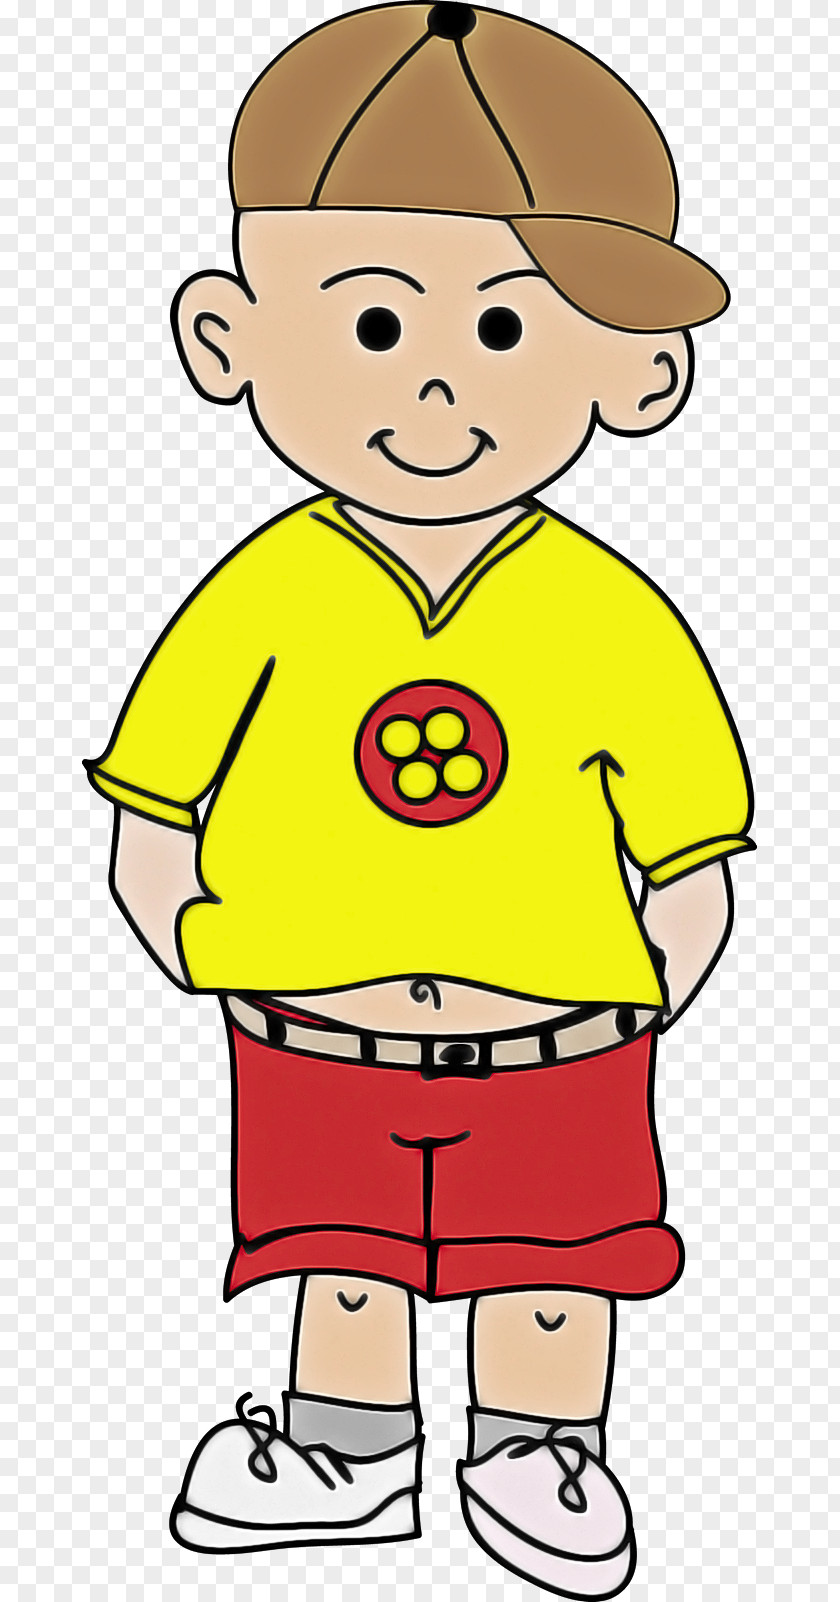 Male Smile Cartoon Child Yellow Facial Expression Clip Art PNG